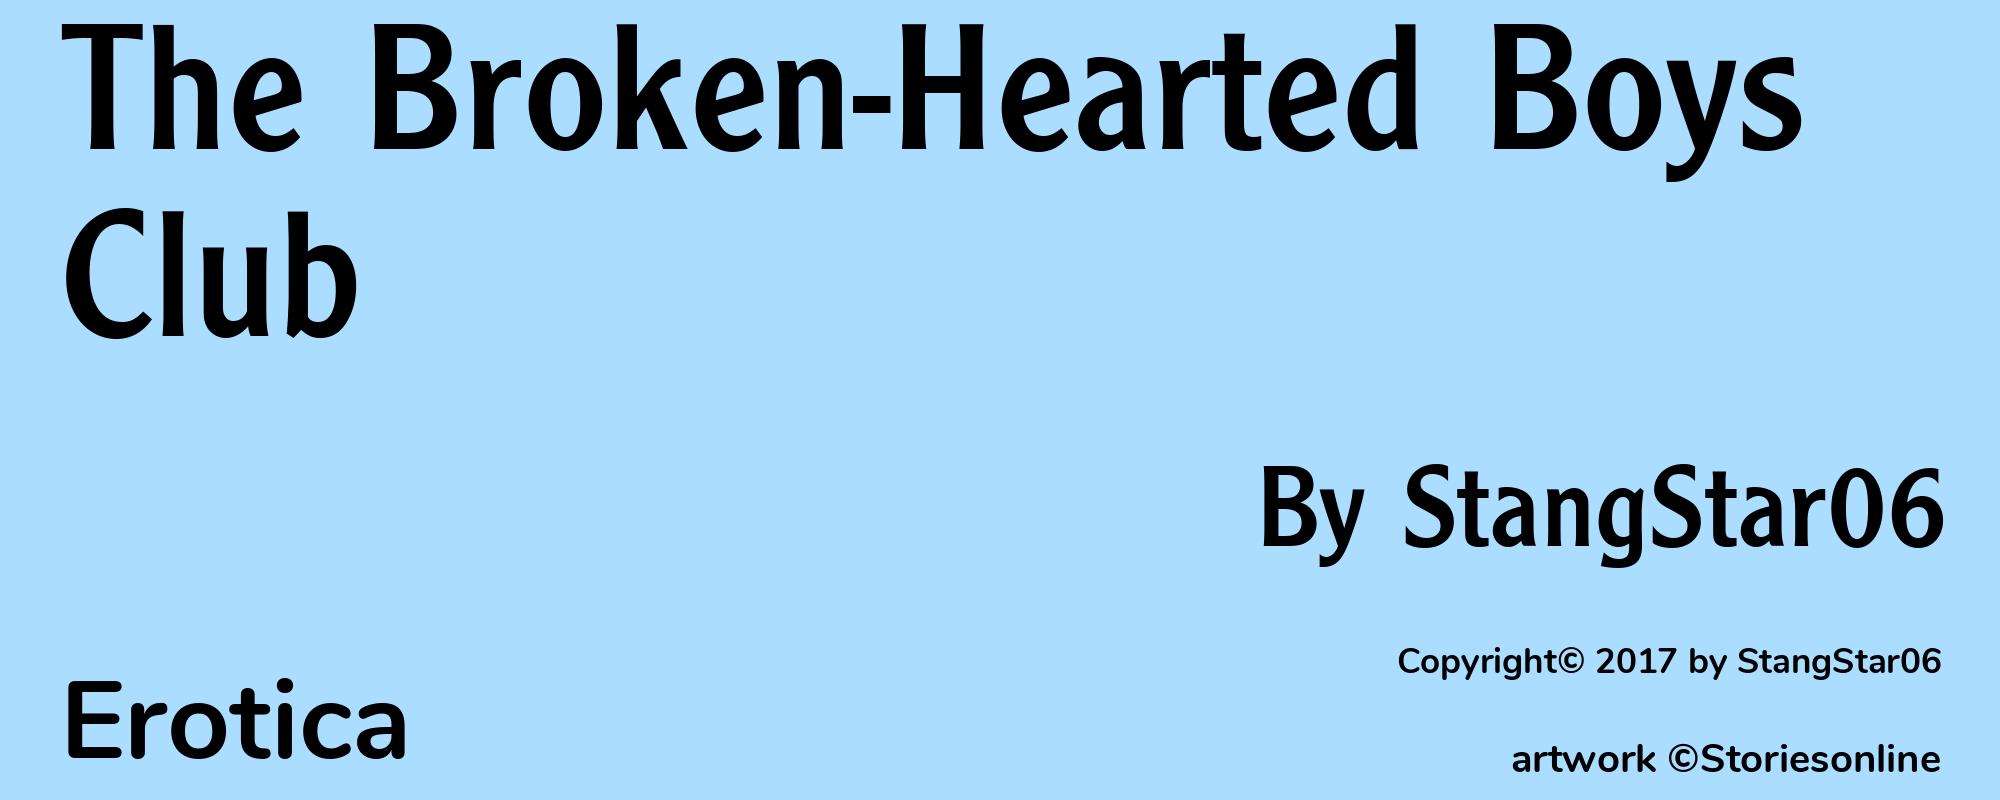 The Broken-Hearted Boys Club - Cover